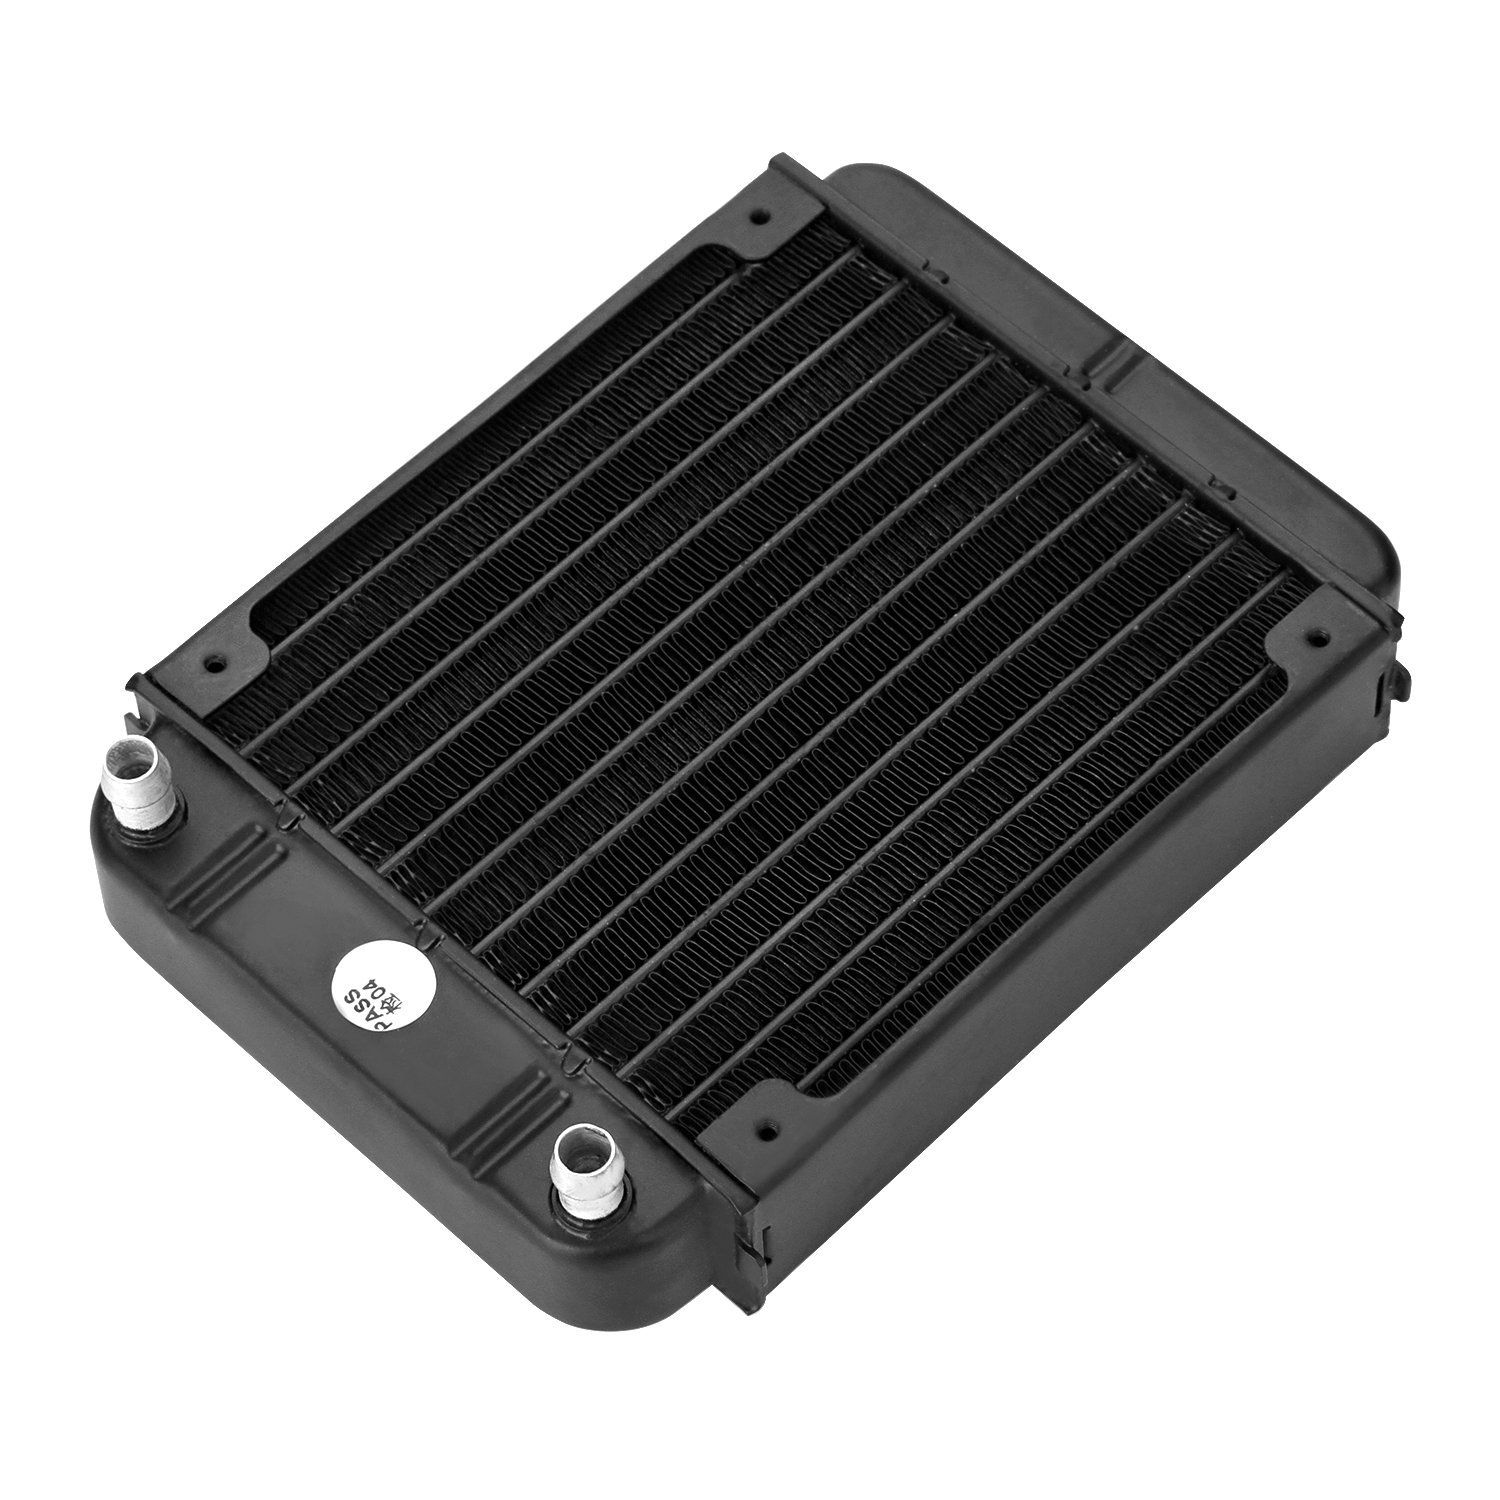 Book Cover AGPtek 12 Pipe Aluminum Heat Exchanger Radiator for PC CPU CO2 Laser Water Cool System Computer